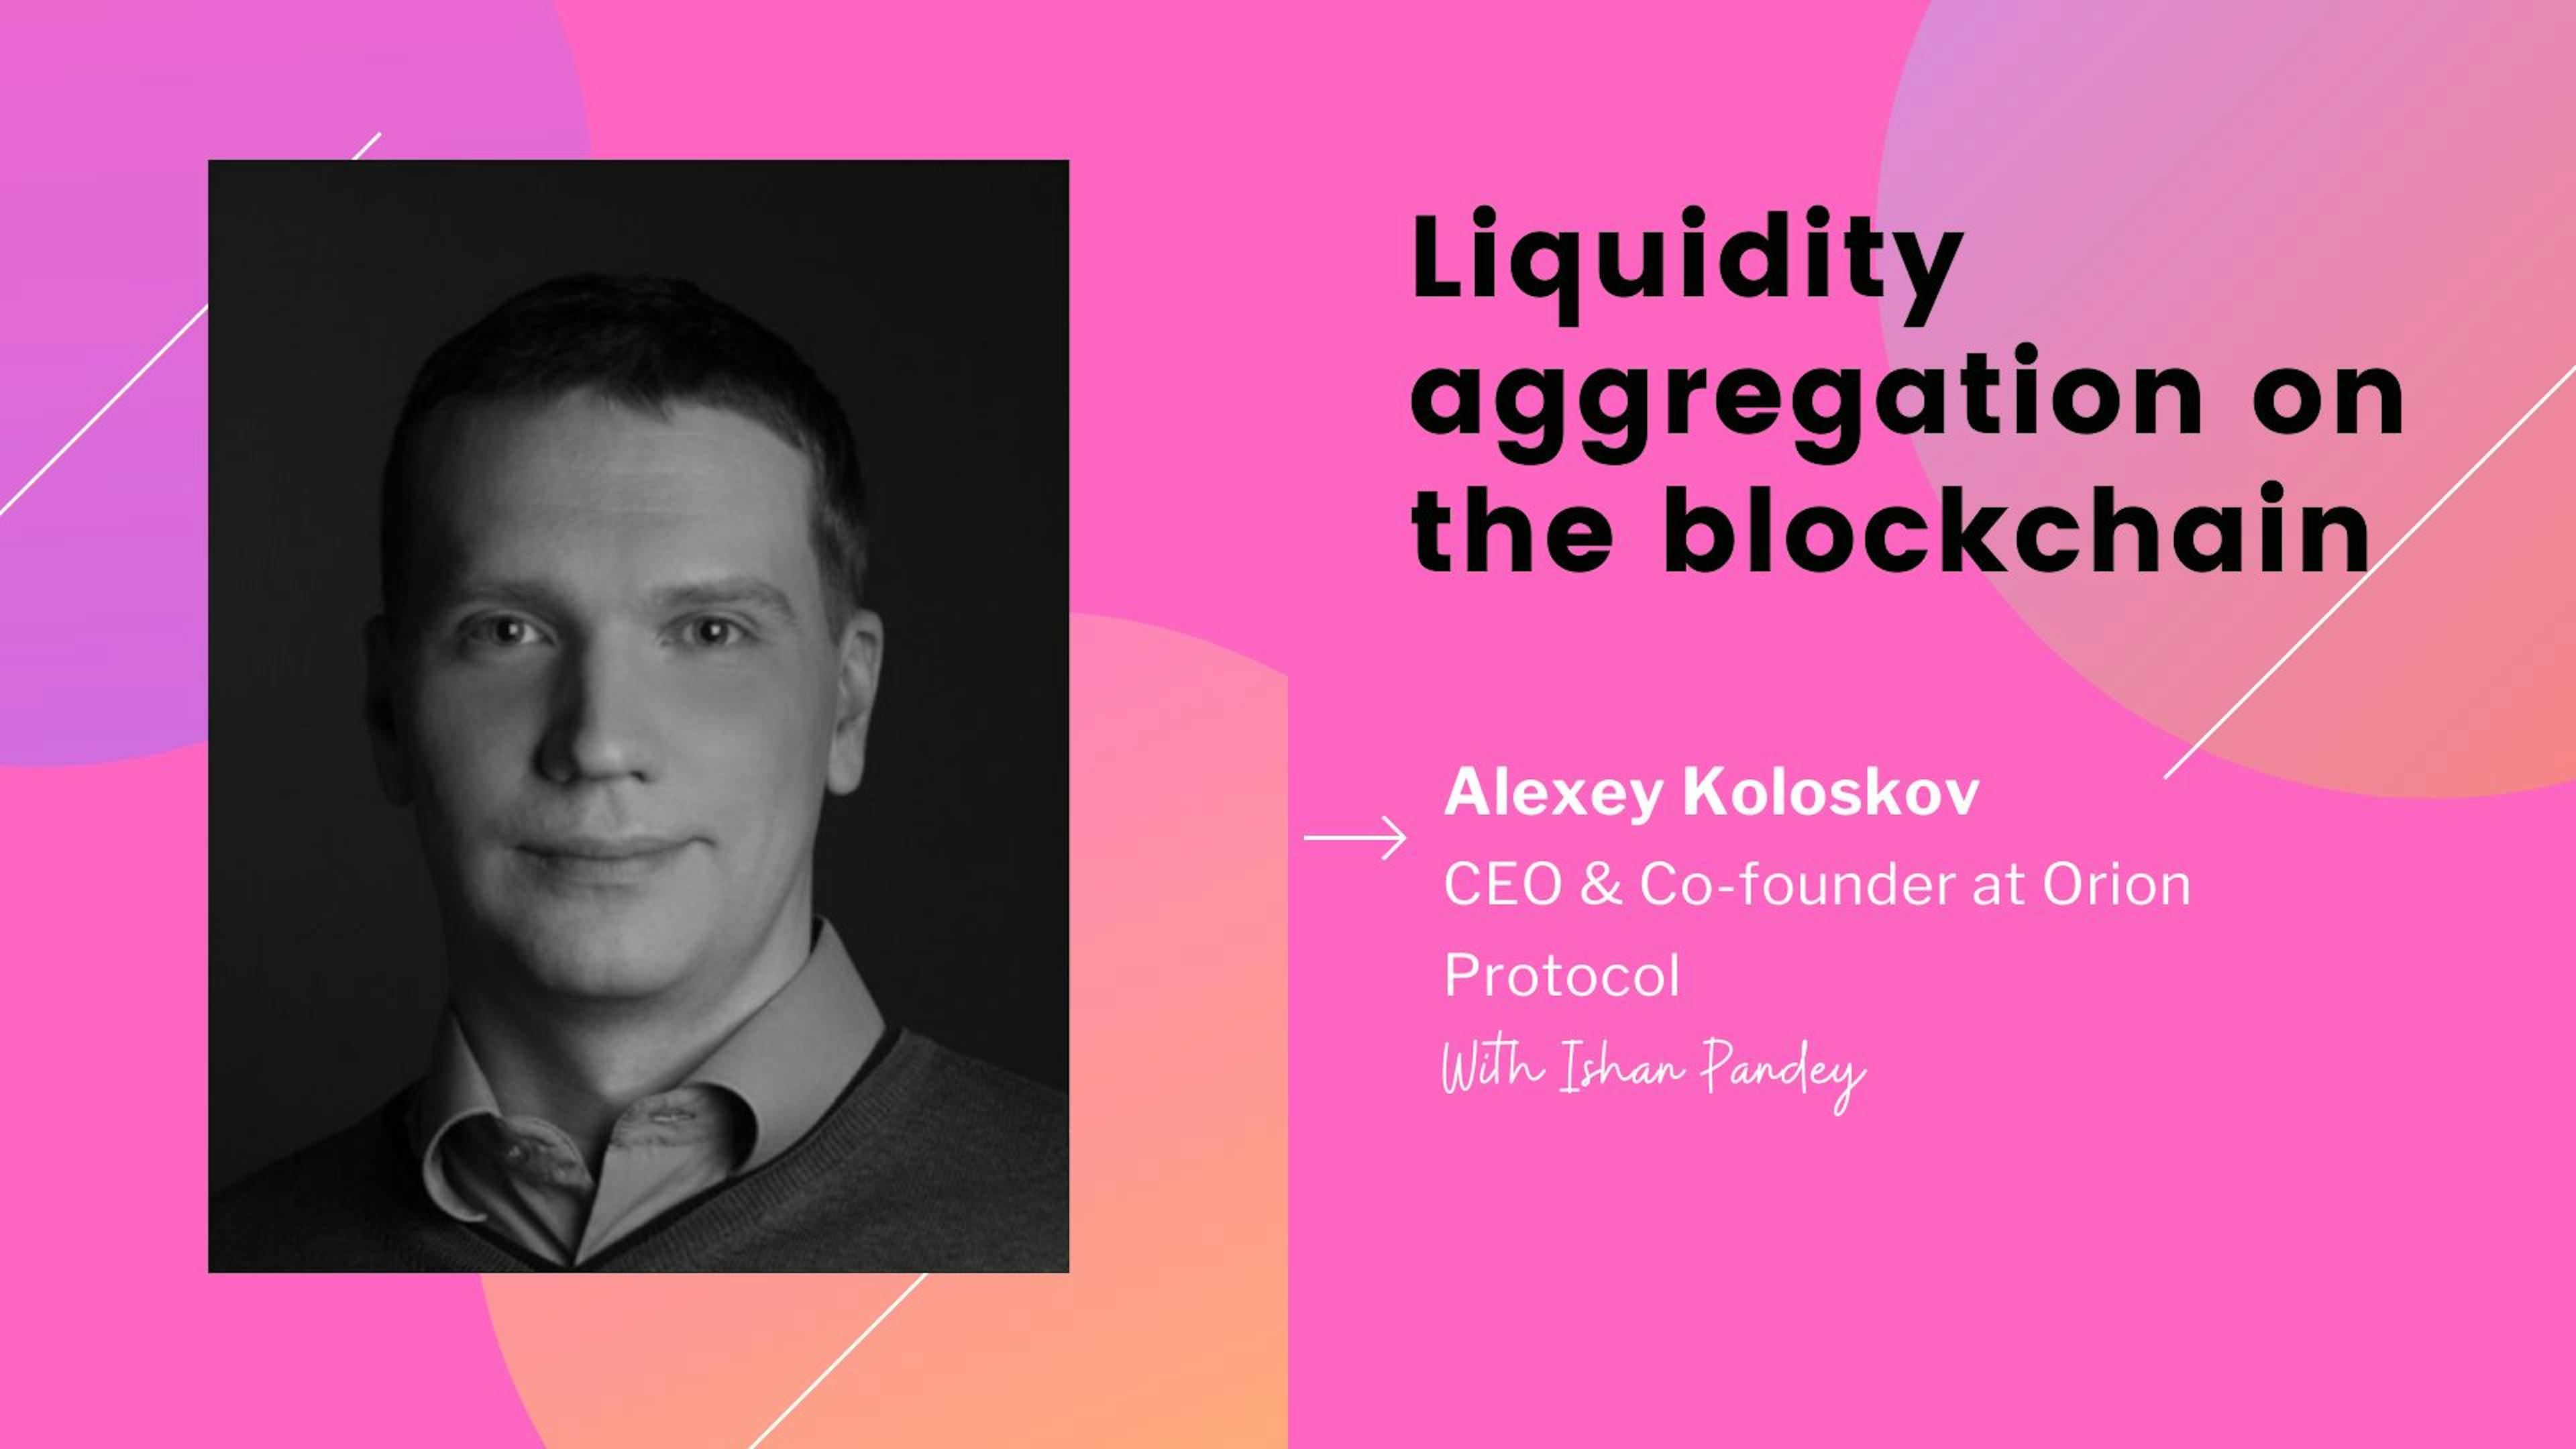 /liquidity-aggregation-and-farming-on-blockchain-with-alexey-koloskov-lxp34z7 feature image